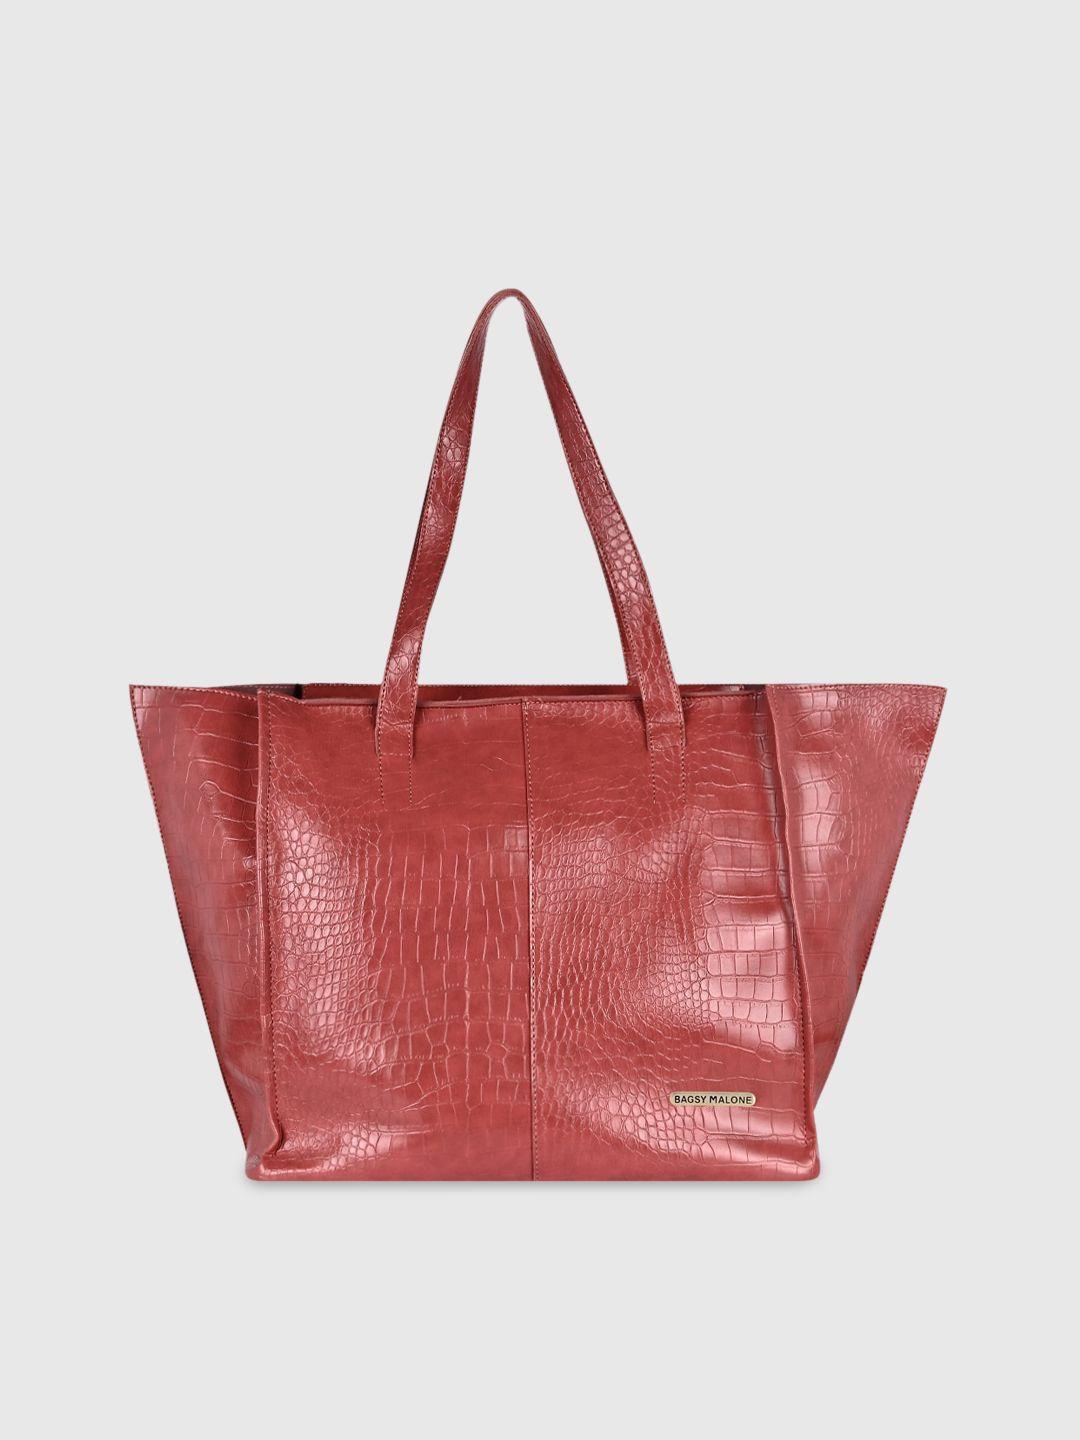 bagsy malone textured structured tote bag